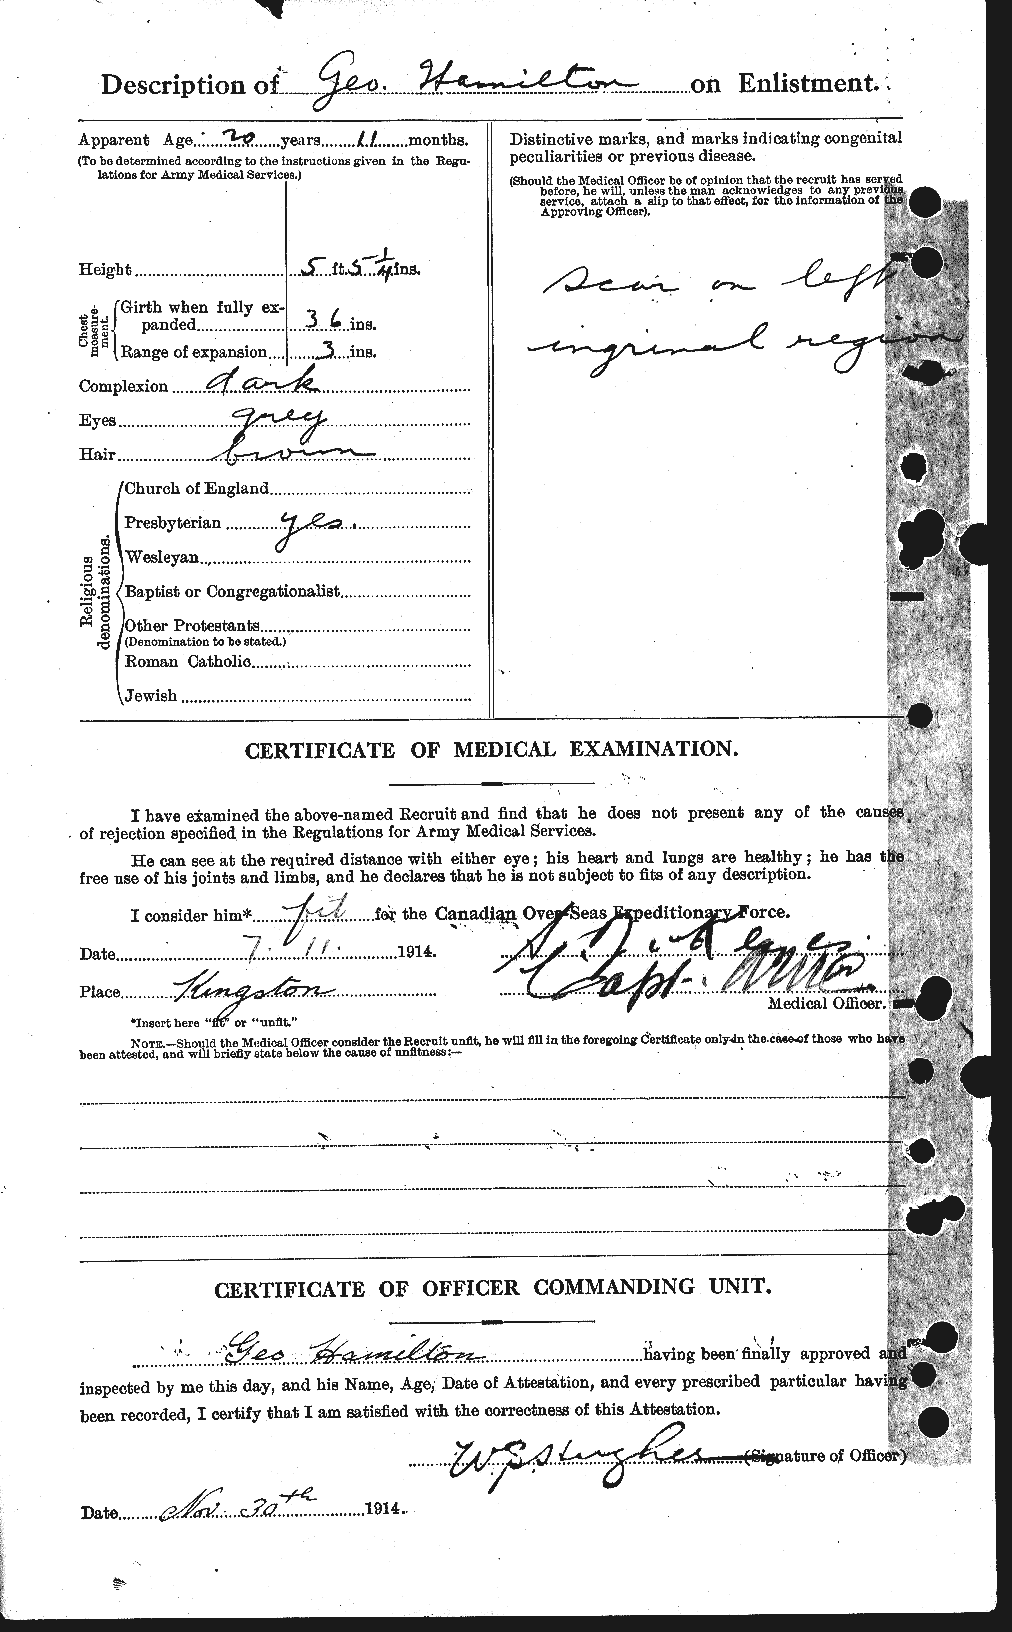 Personnel Records of the First World War - CEF 372433b